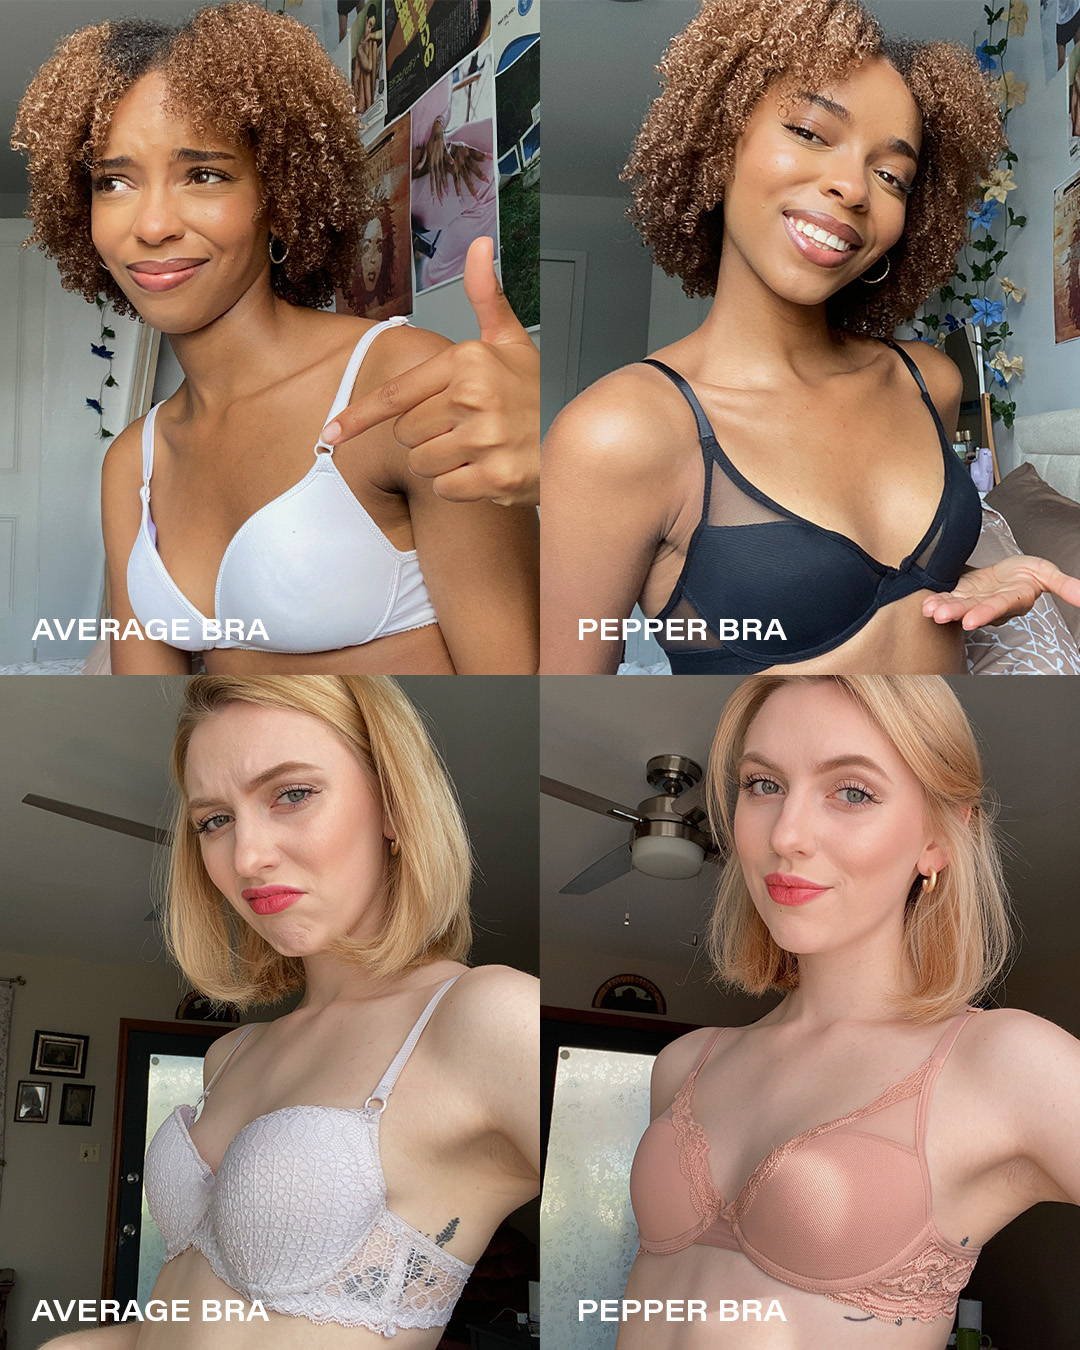 The Best Bras For Small Boobs 2 – Pepper